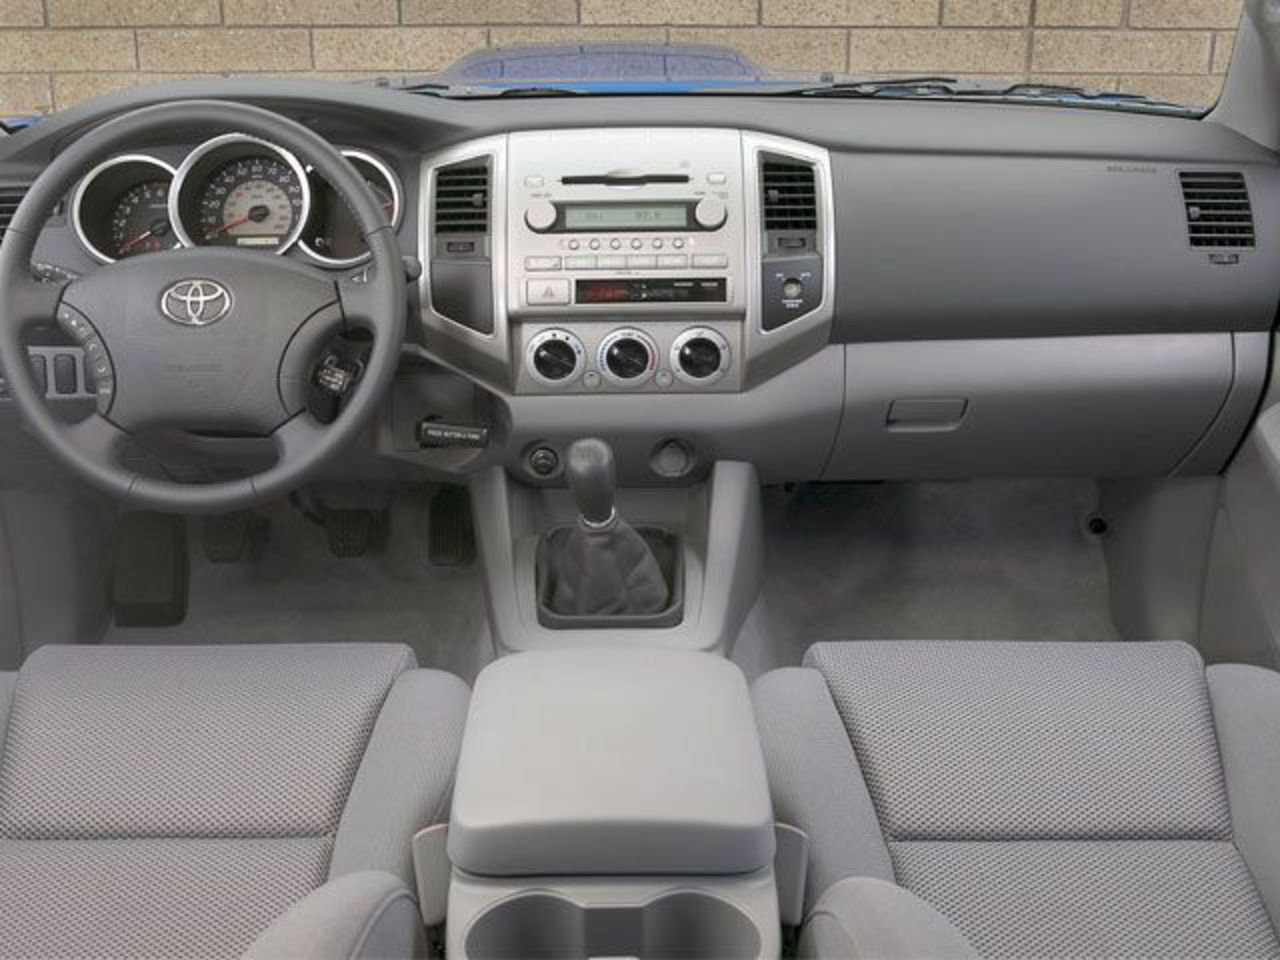 Intérieur Toyota Tacoma Trd Sterring 2005